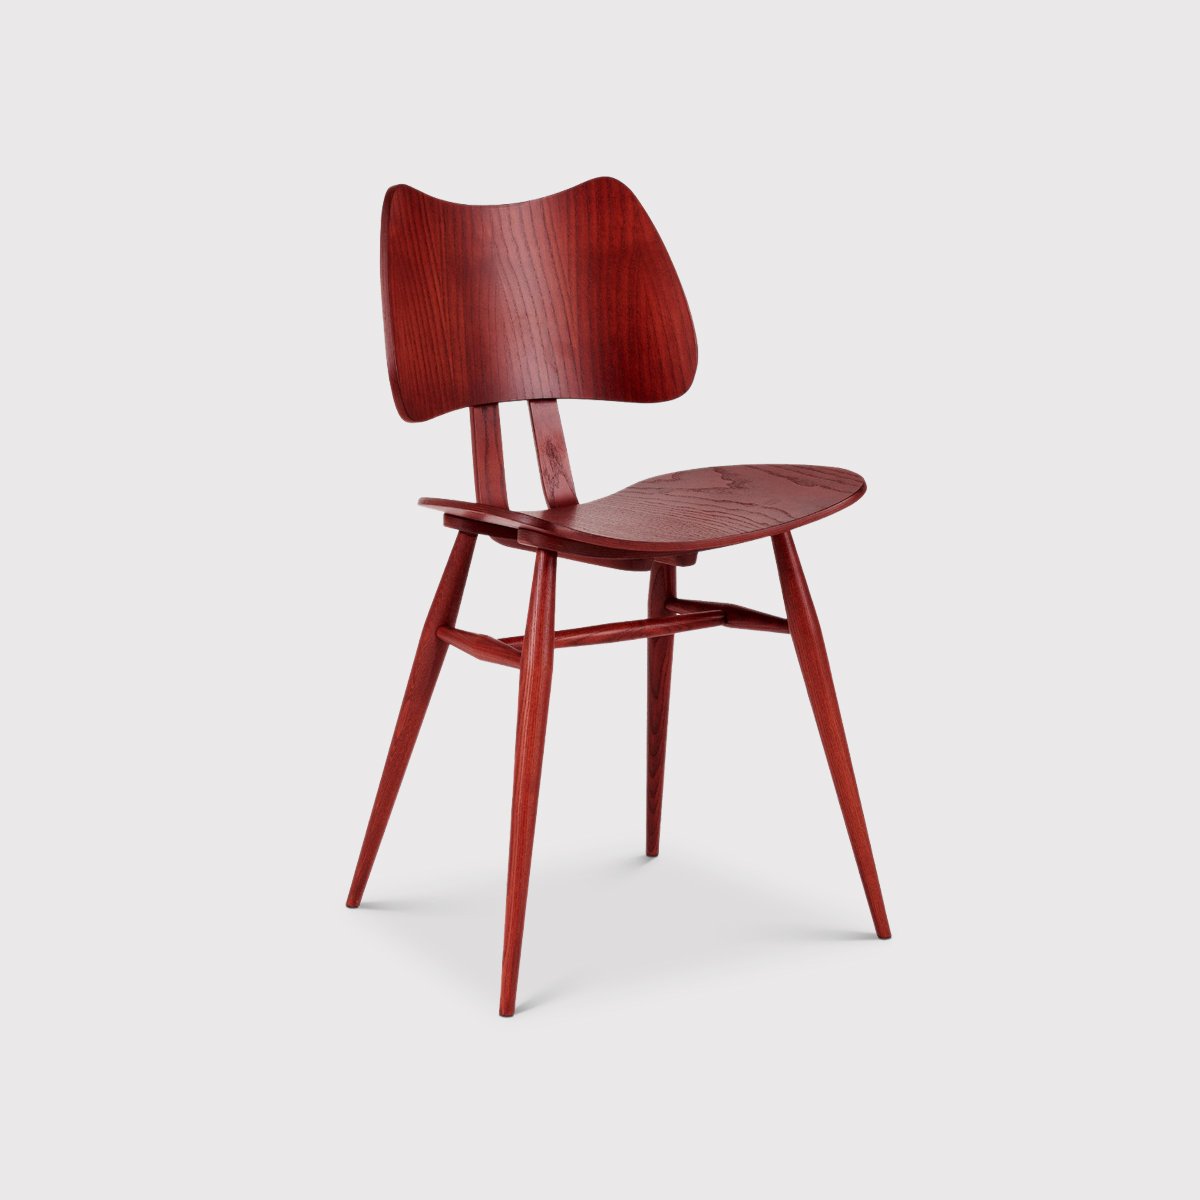 L.Ercolani Butterfly Dining Chair, Red | Barker & Stonehouse